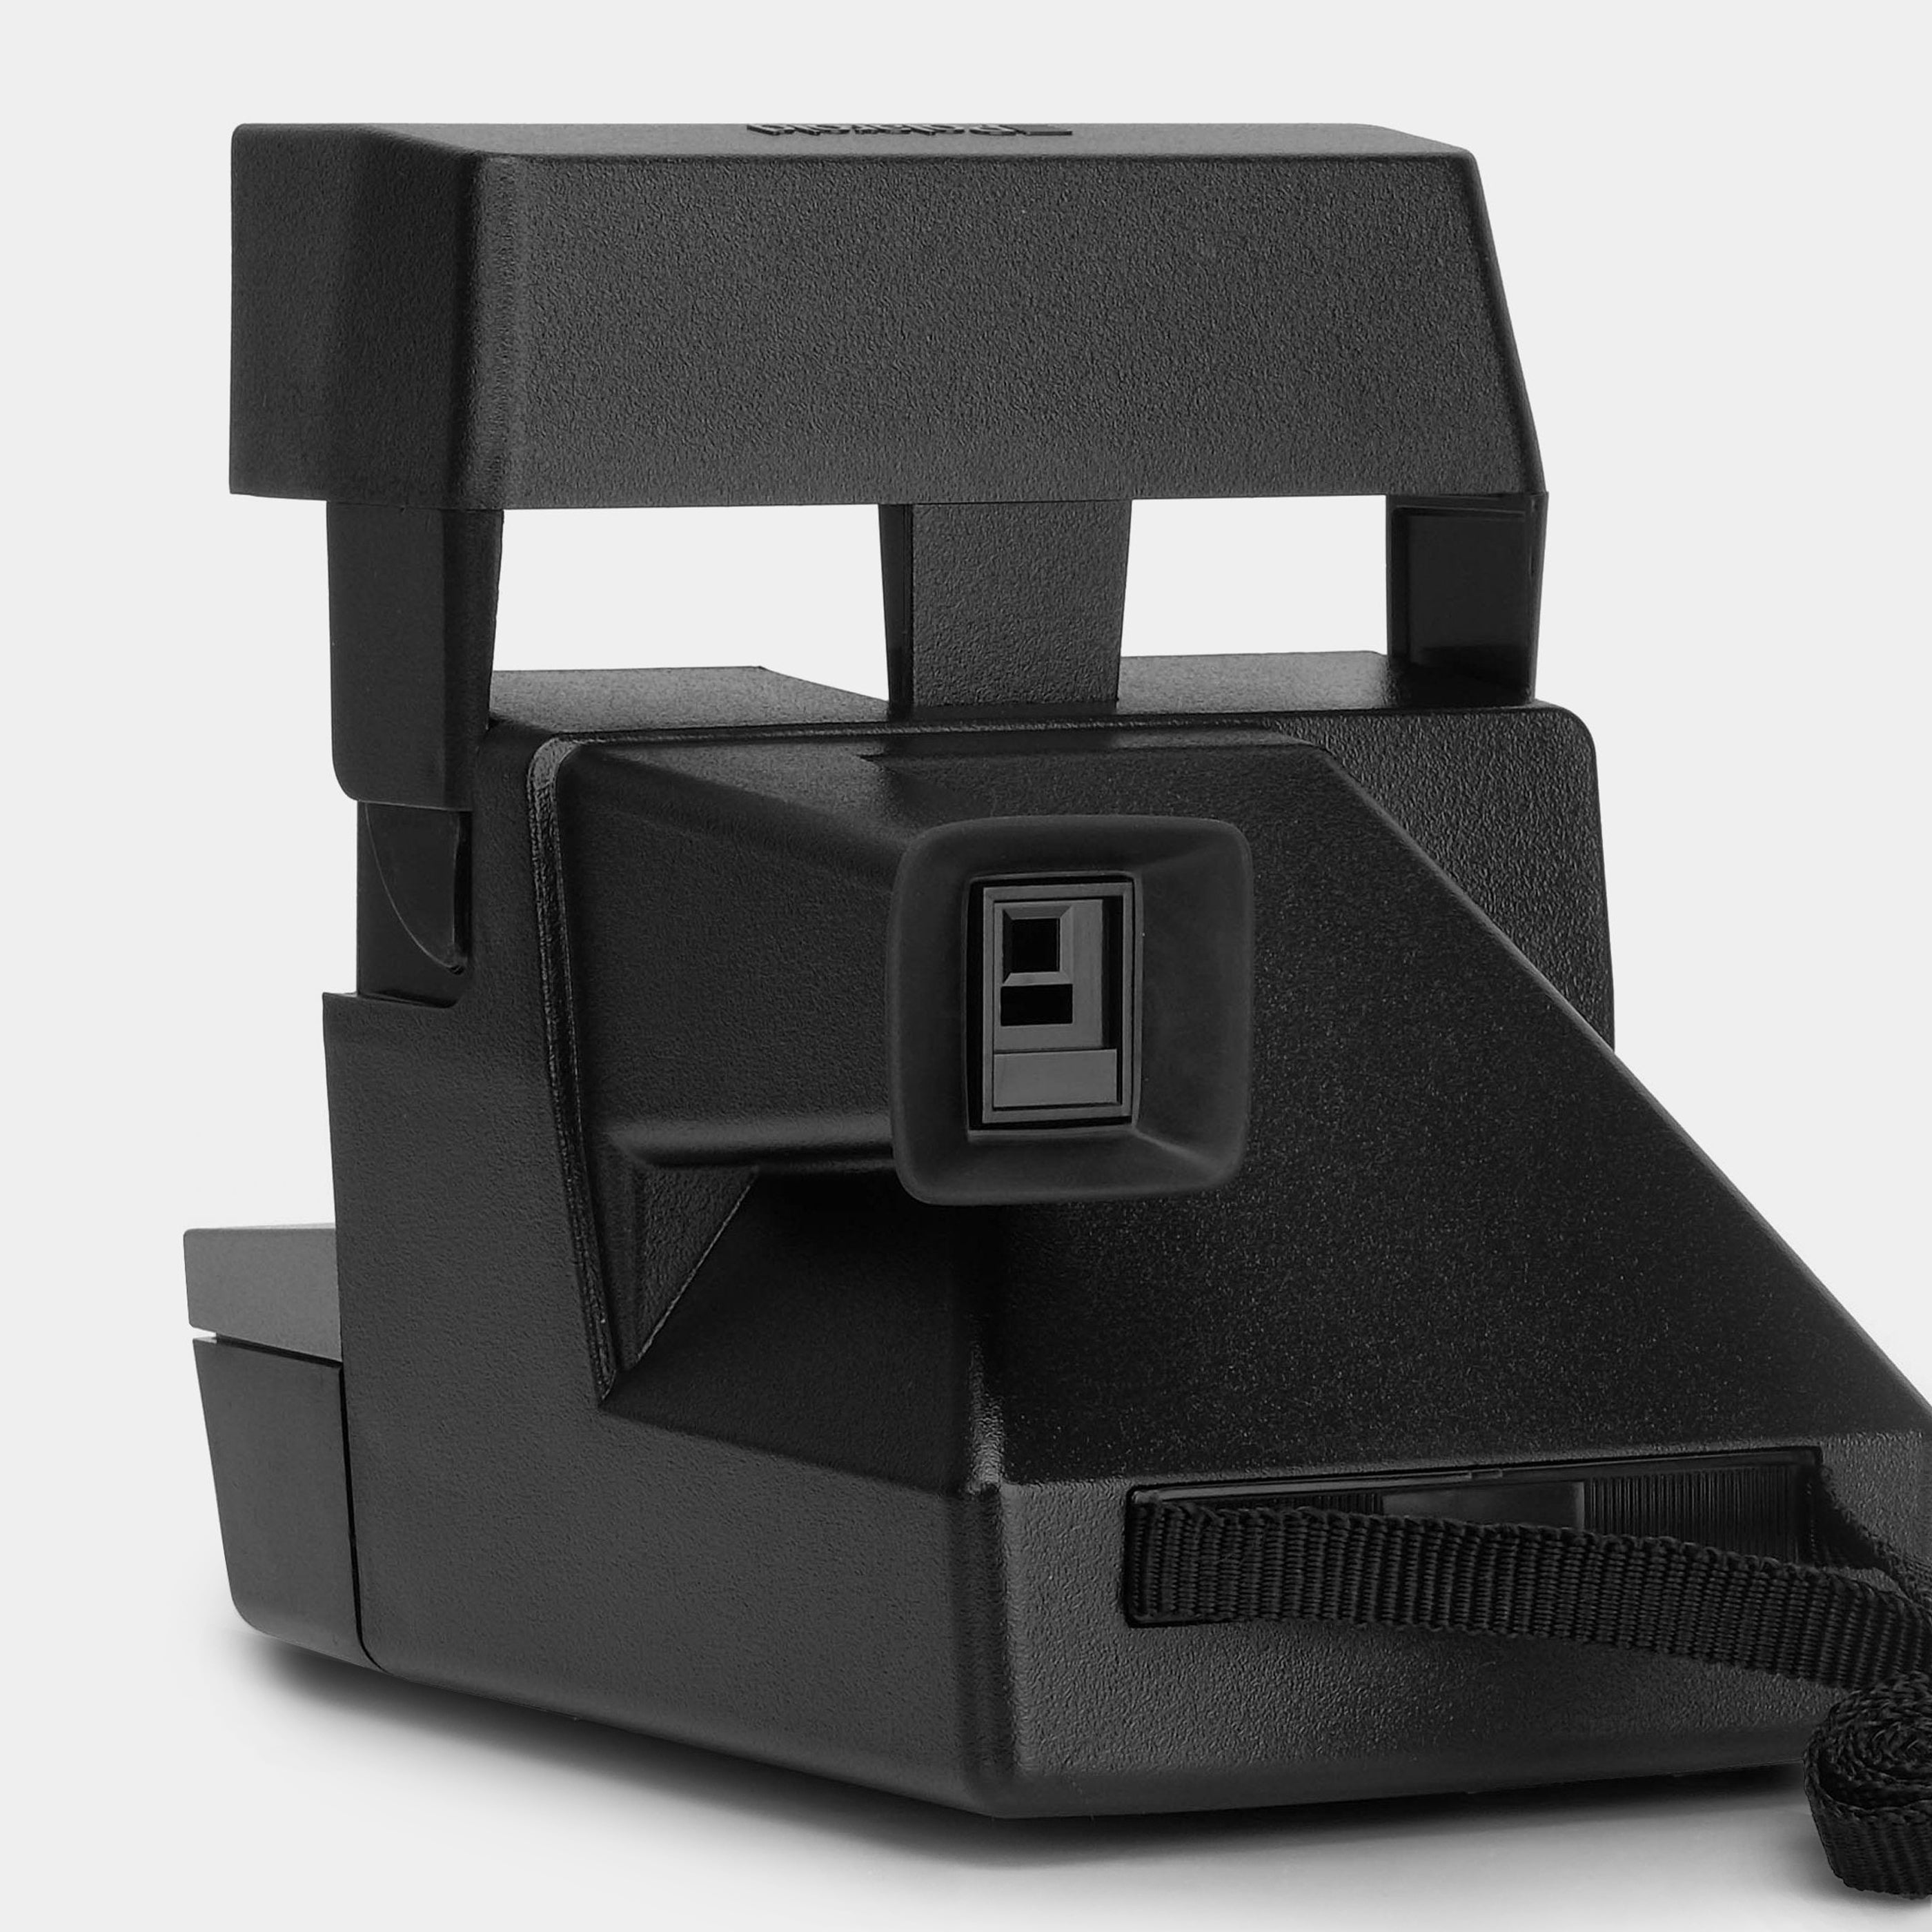 Replacement Polaroid 600 Viewfinder Eye Cup